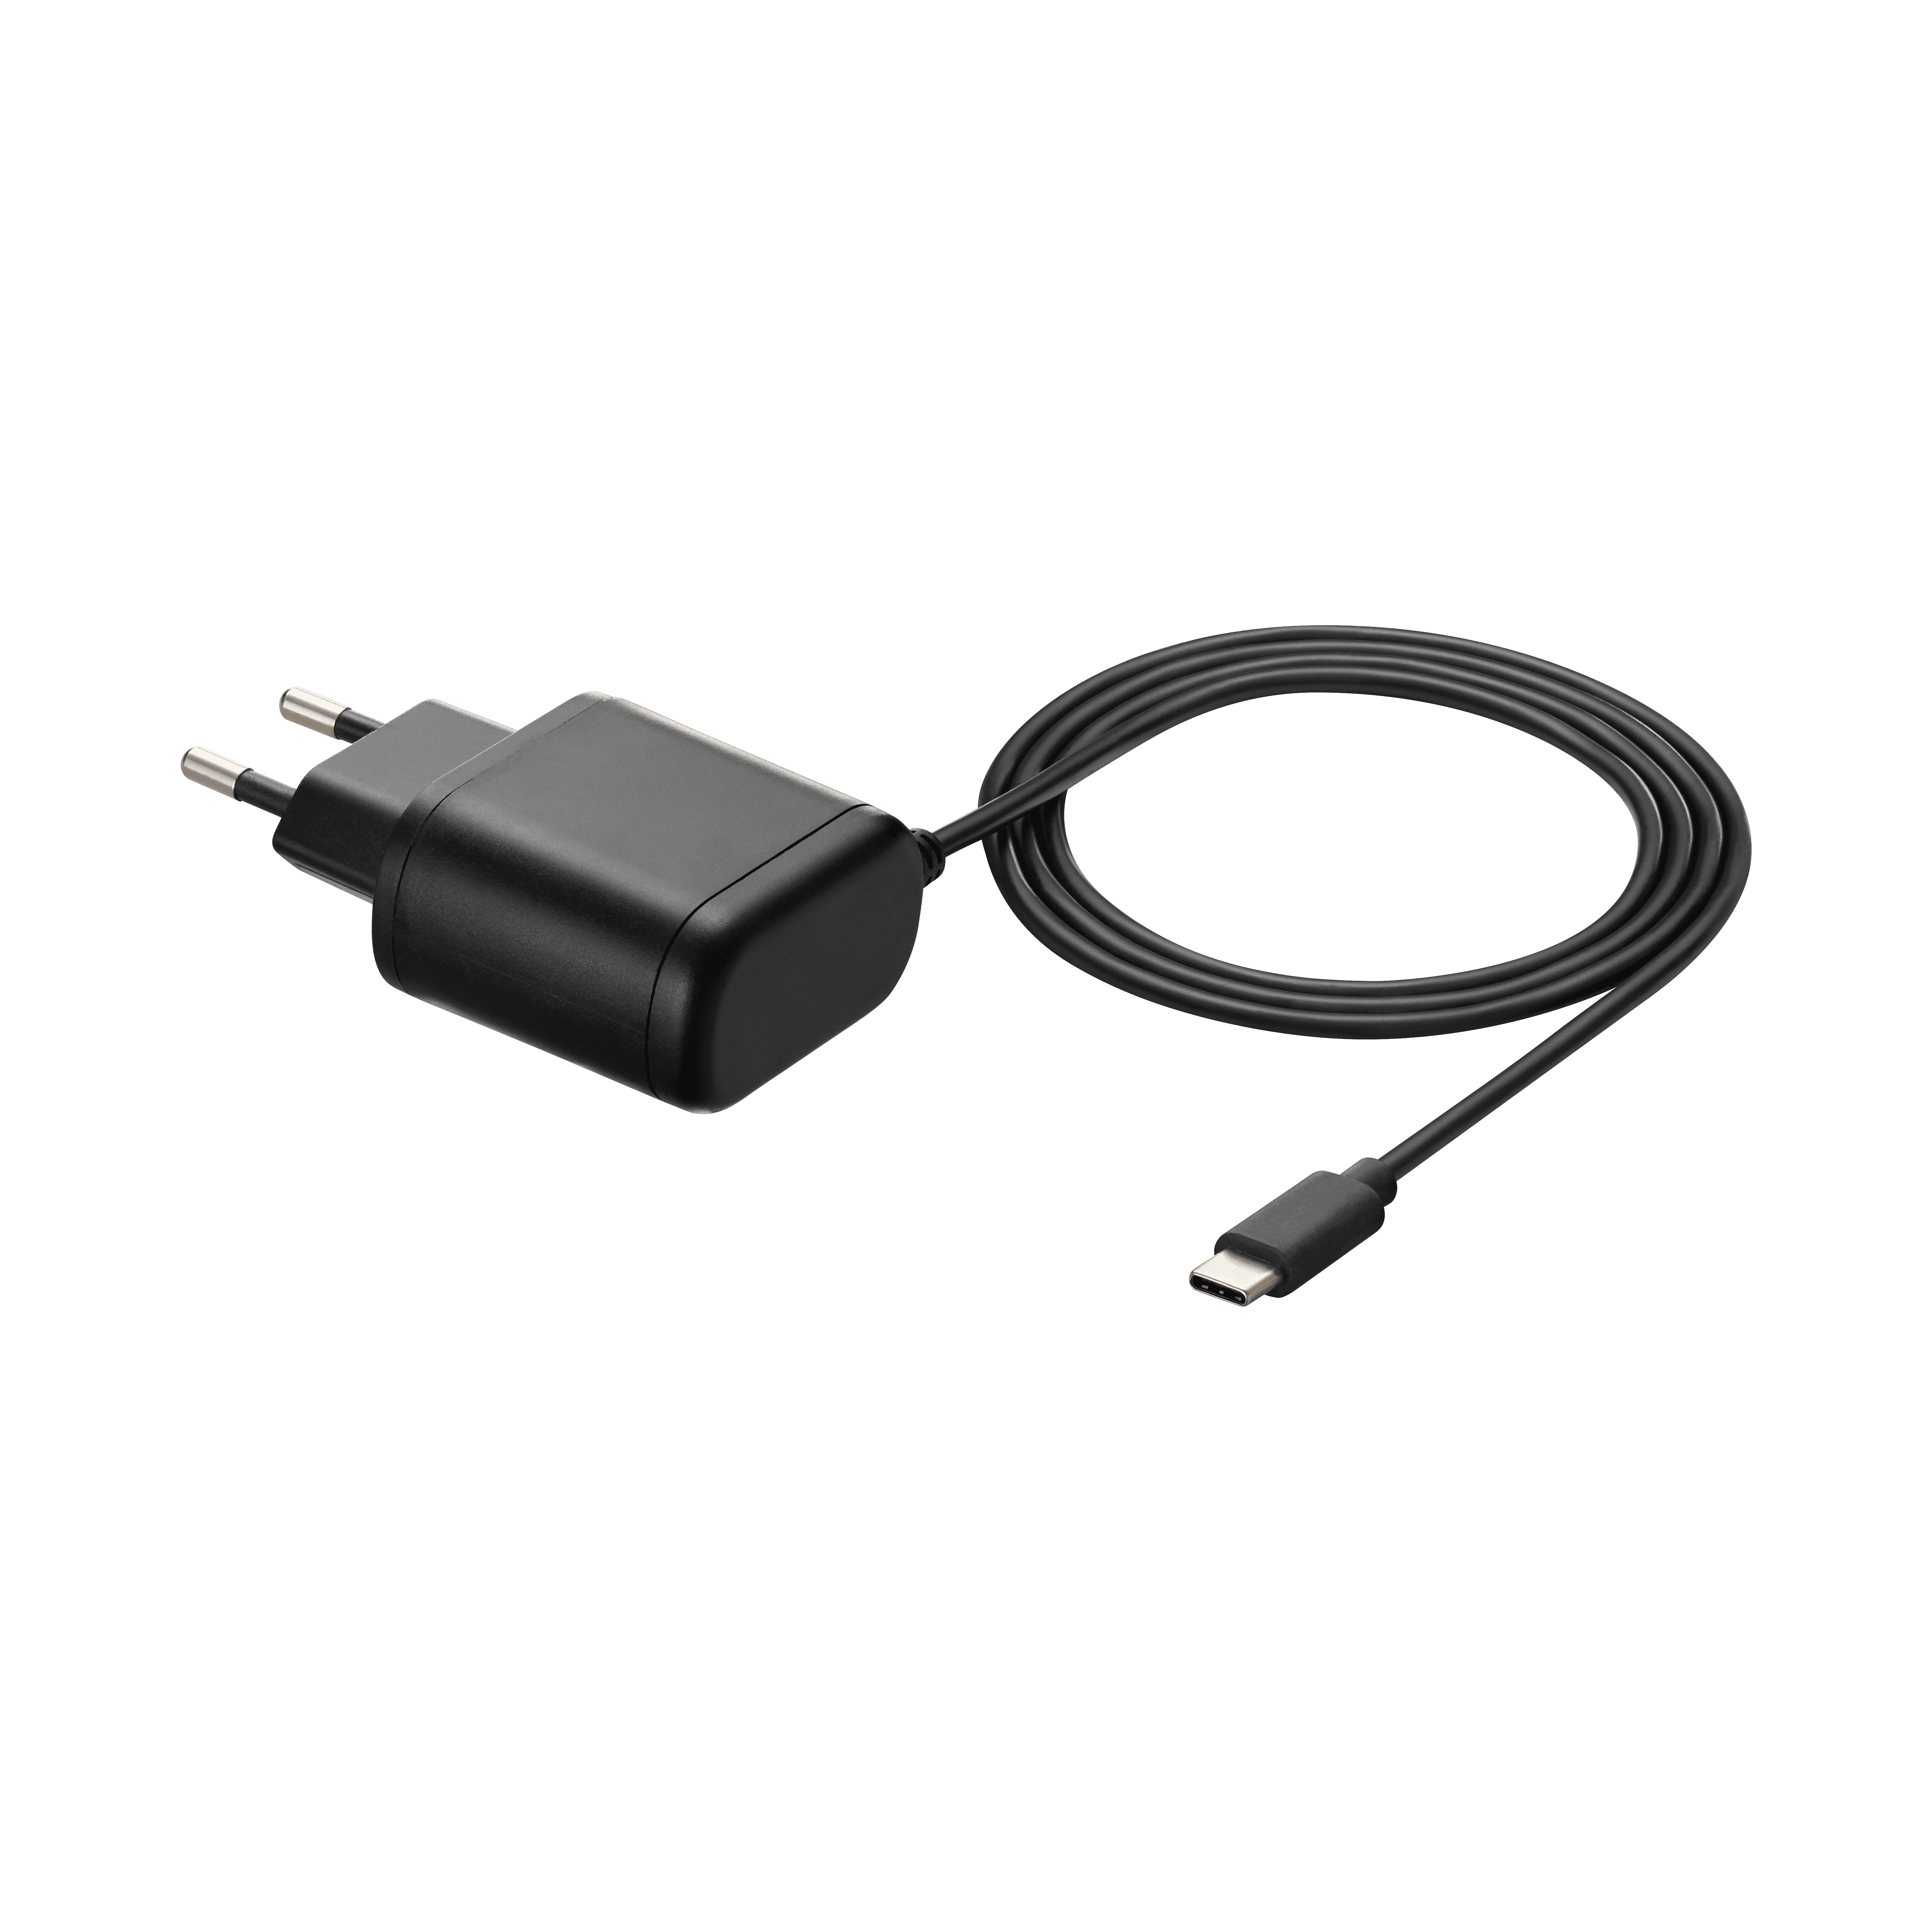 TAC-303 Wall charger with captive cable Type C plug